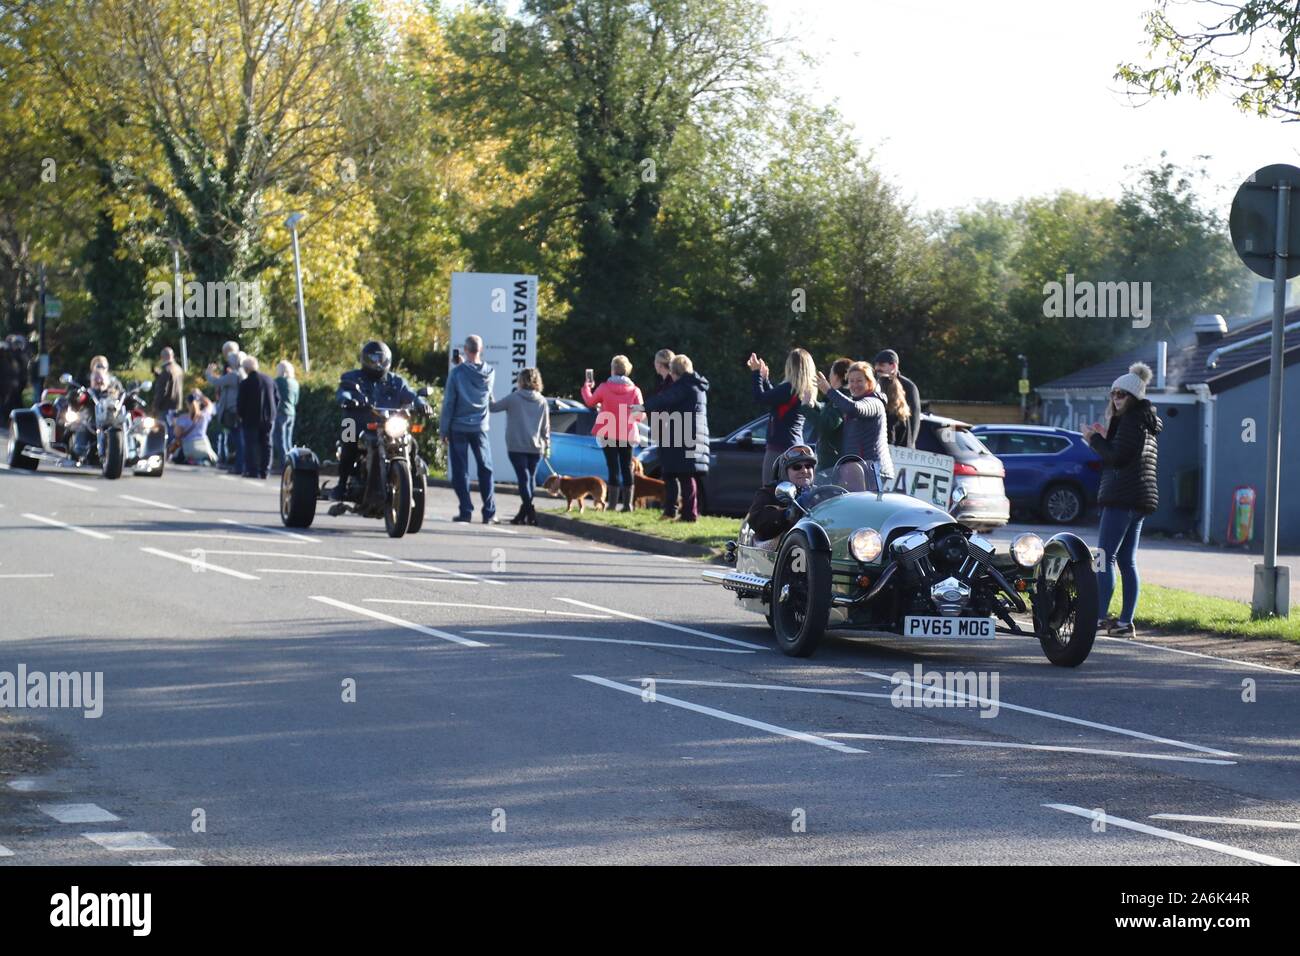 Benson, UK. 27th Oct 2019, Over 4,500 bikers gathered at RAF Benson for the Ride of Respect for PC Andrew Harper from Benson to Abingdon. A vintage Morgan three-wheeler and a trike seen here at Benson. Credit: Uwe Deffner / Alamy Live News Stock Photo